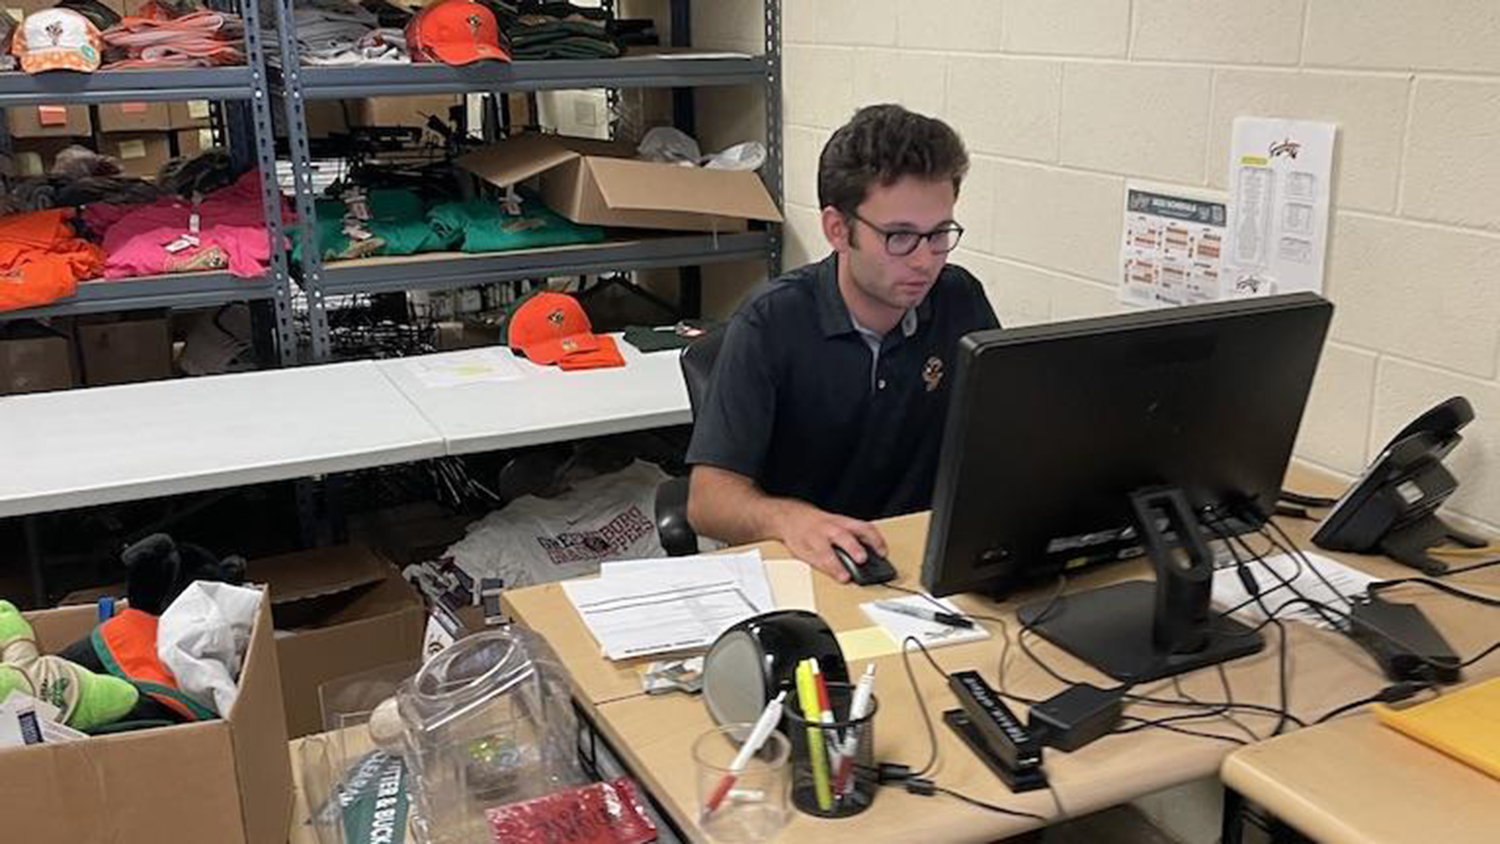 NC State student Mason Cook inputs data on a computer - Greensboro Grasshoppers Intern Mason Cook Develops Sport Management Skills - College of Natural Resources News NC State University